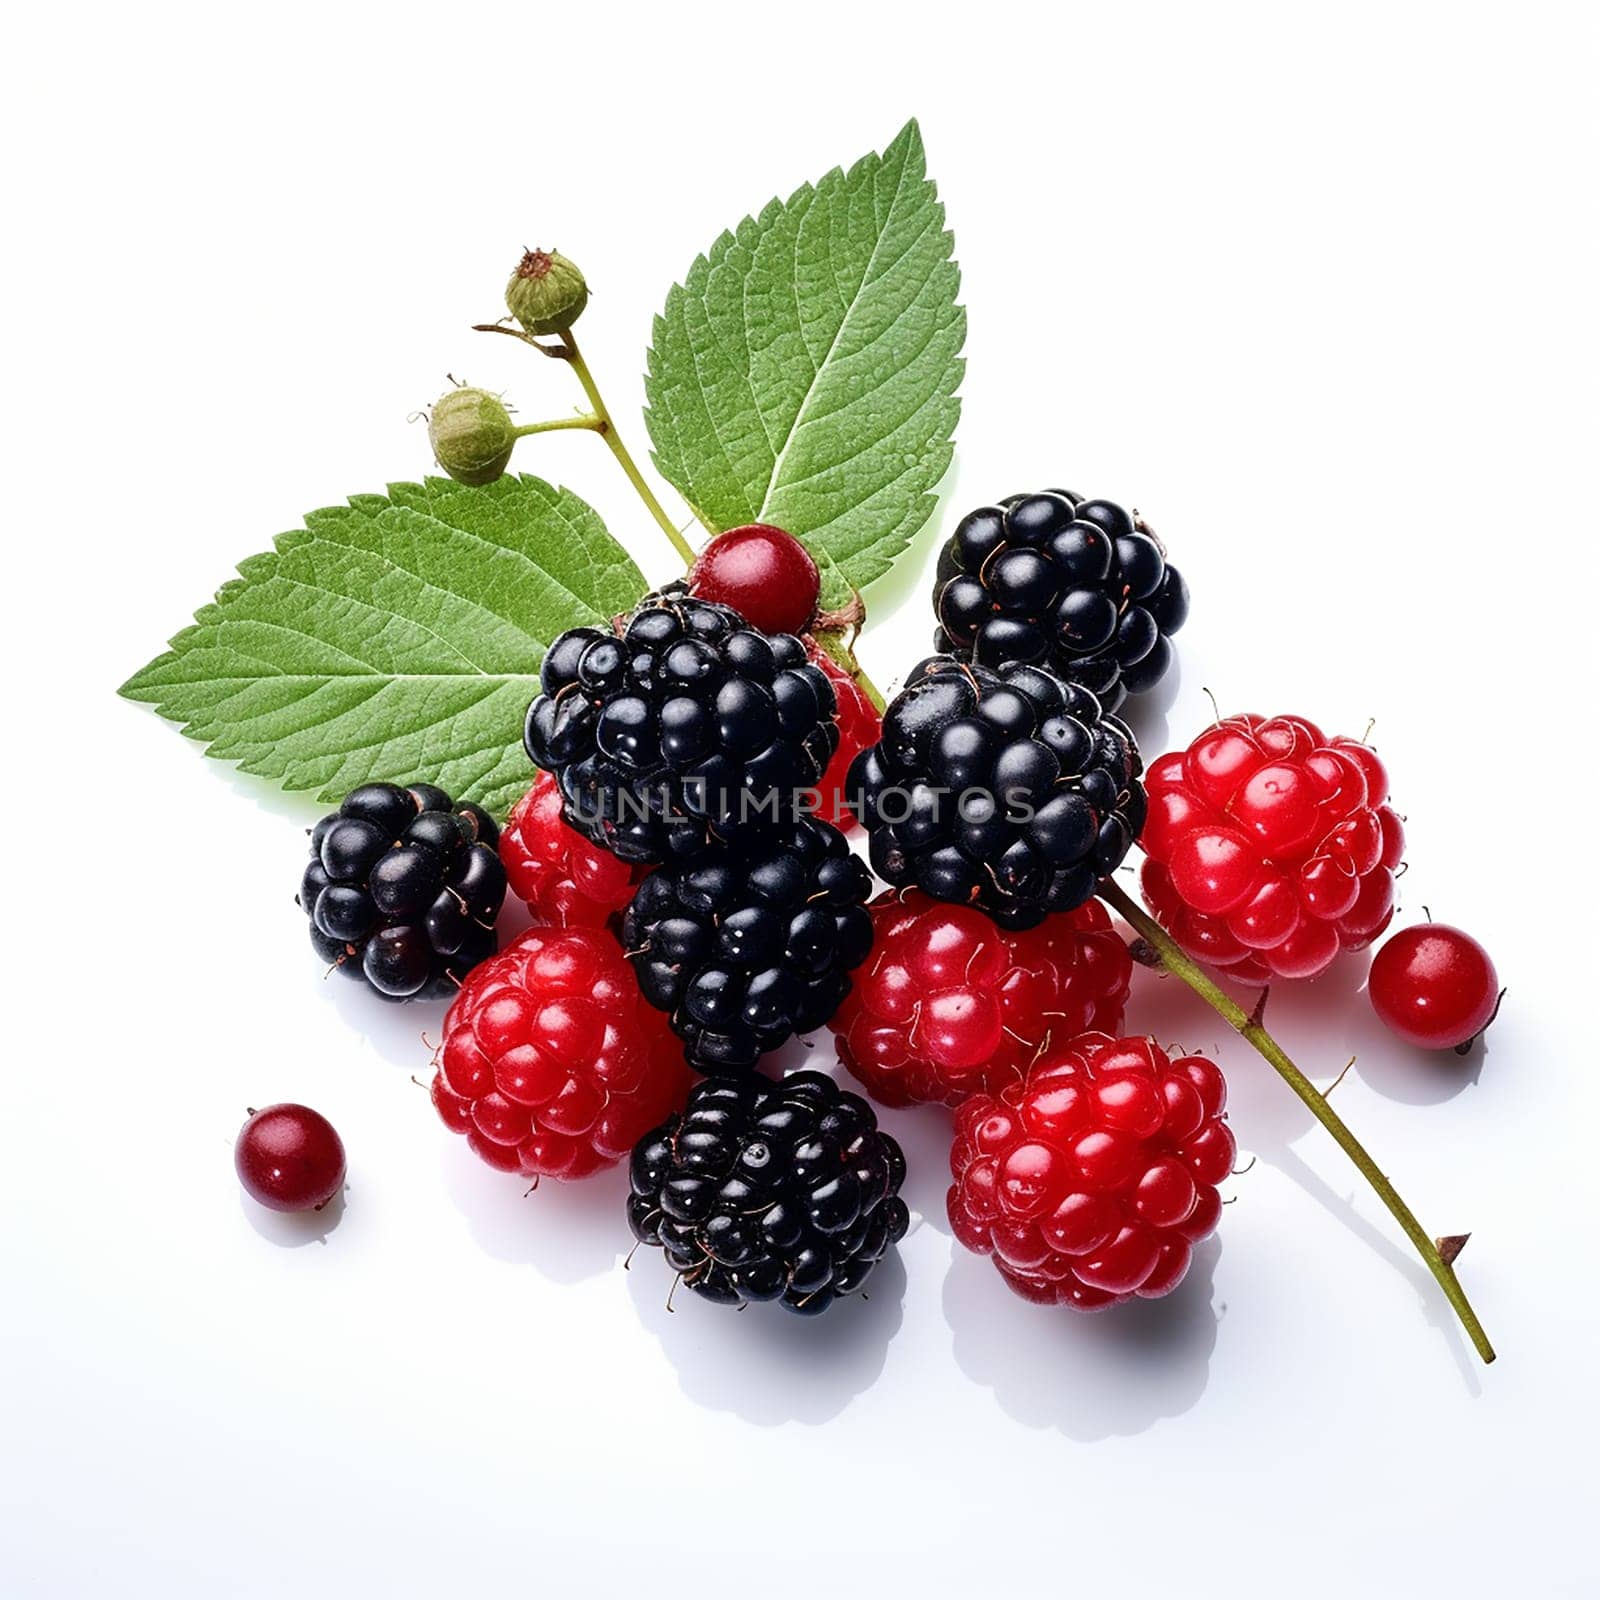 Assorted fresh berries with leaves isolated on white